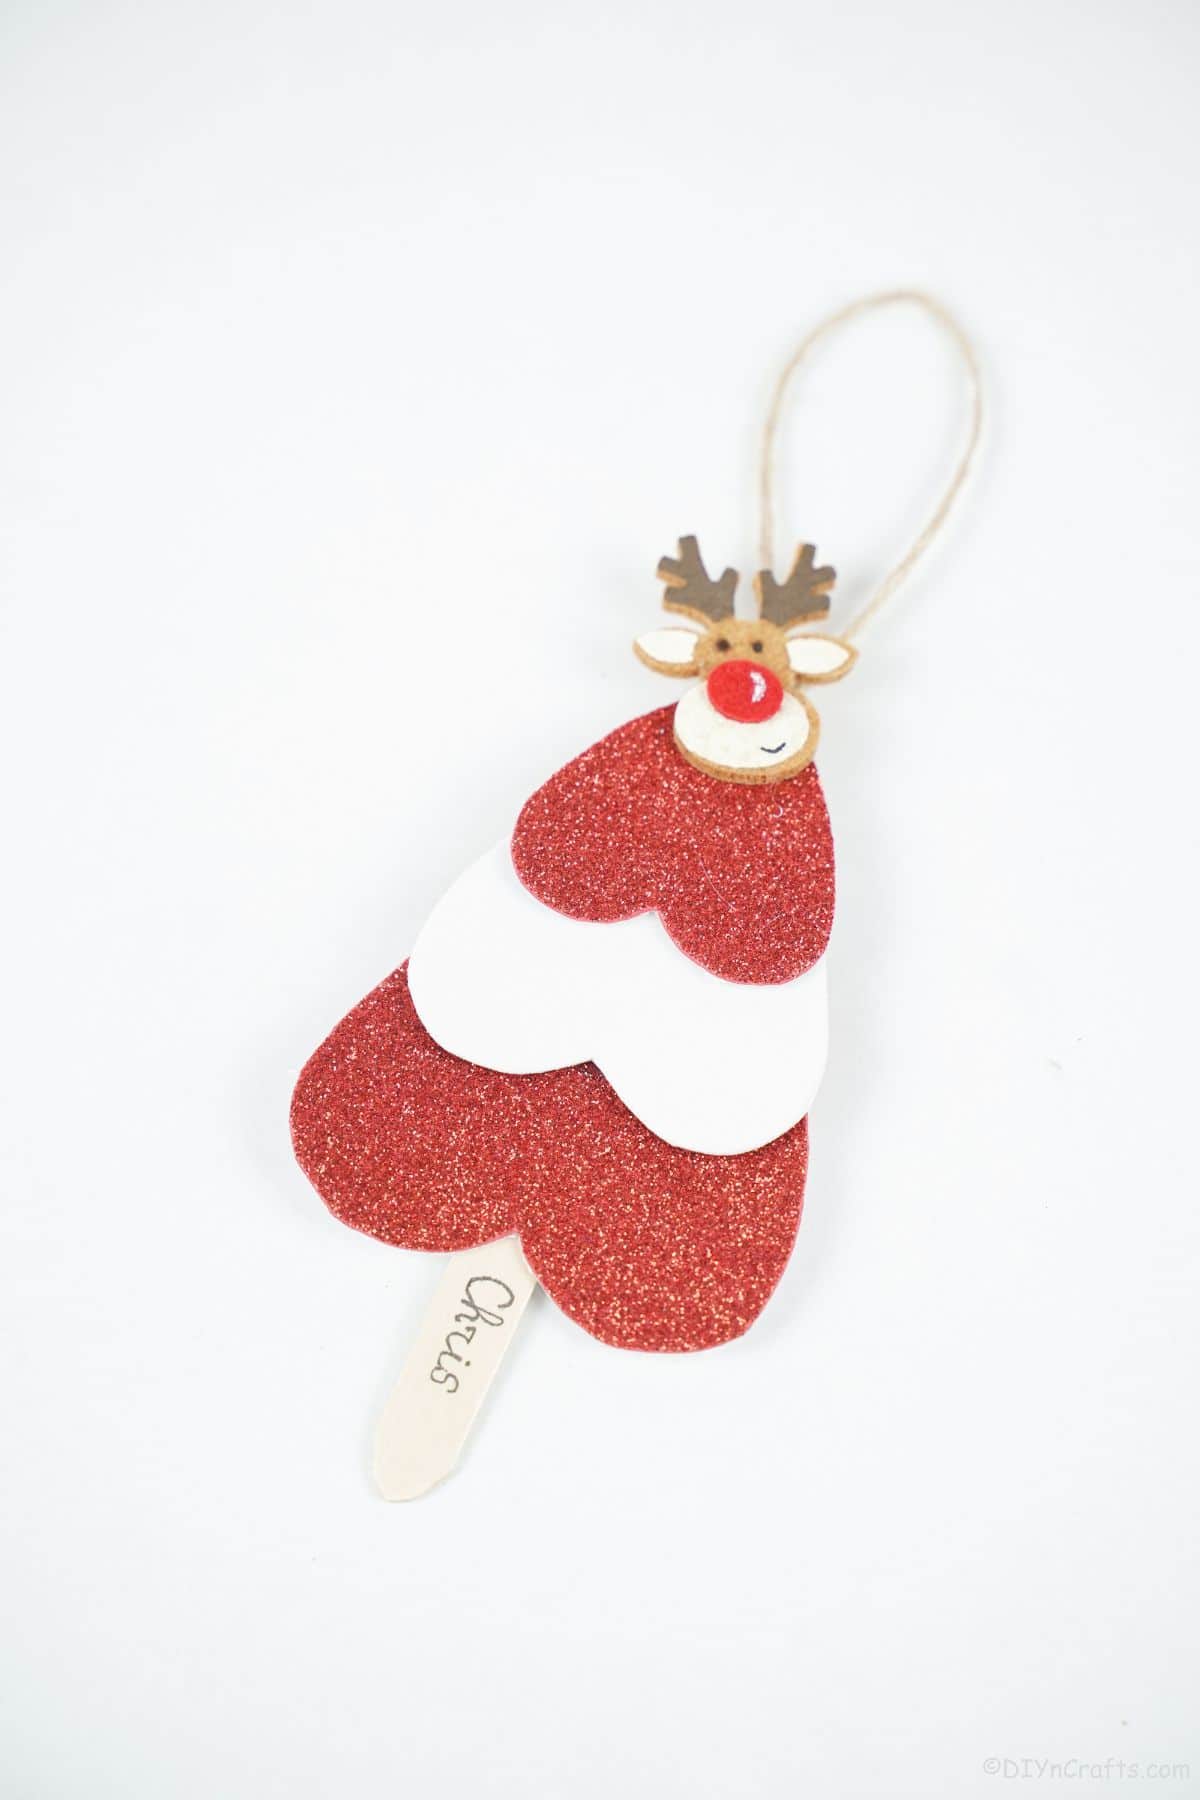 red and white tree ornament on white table